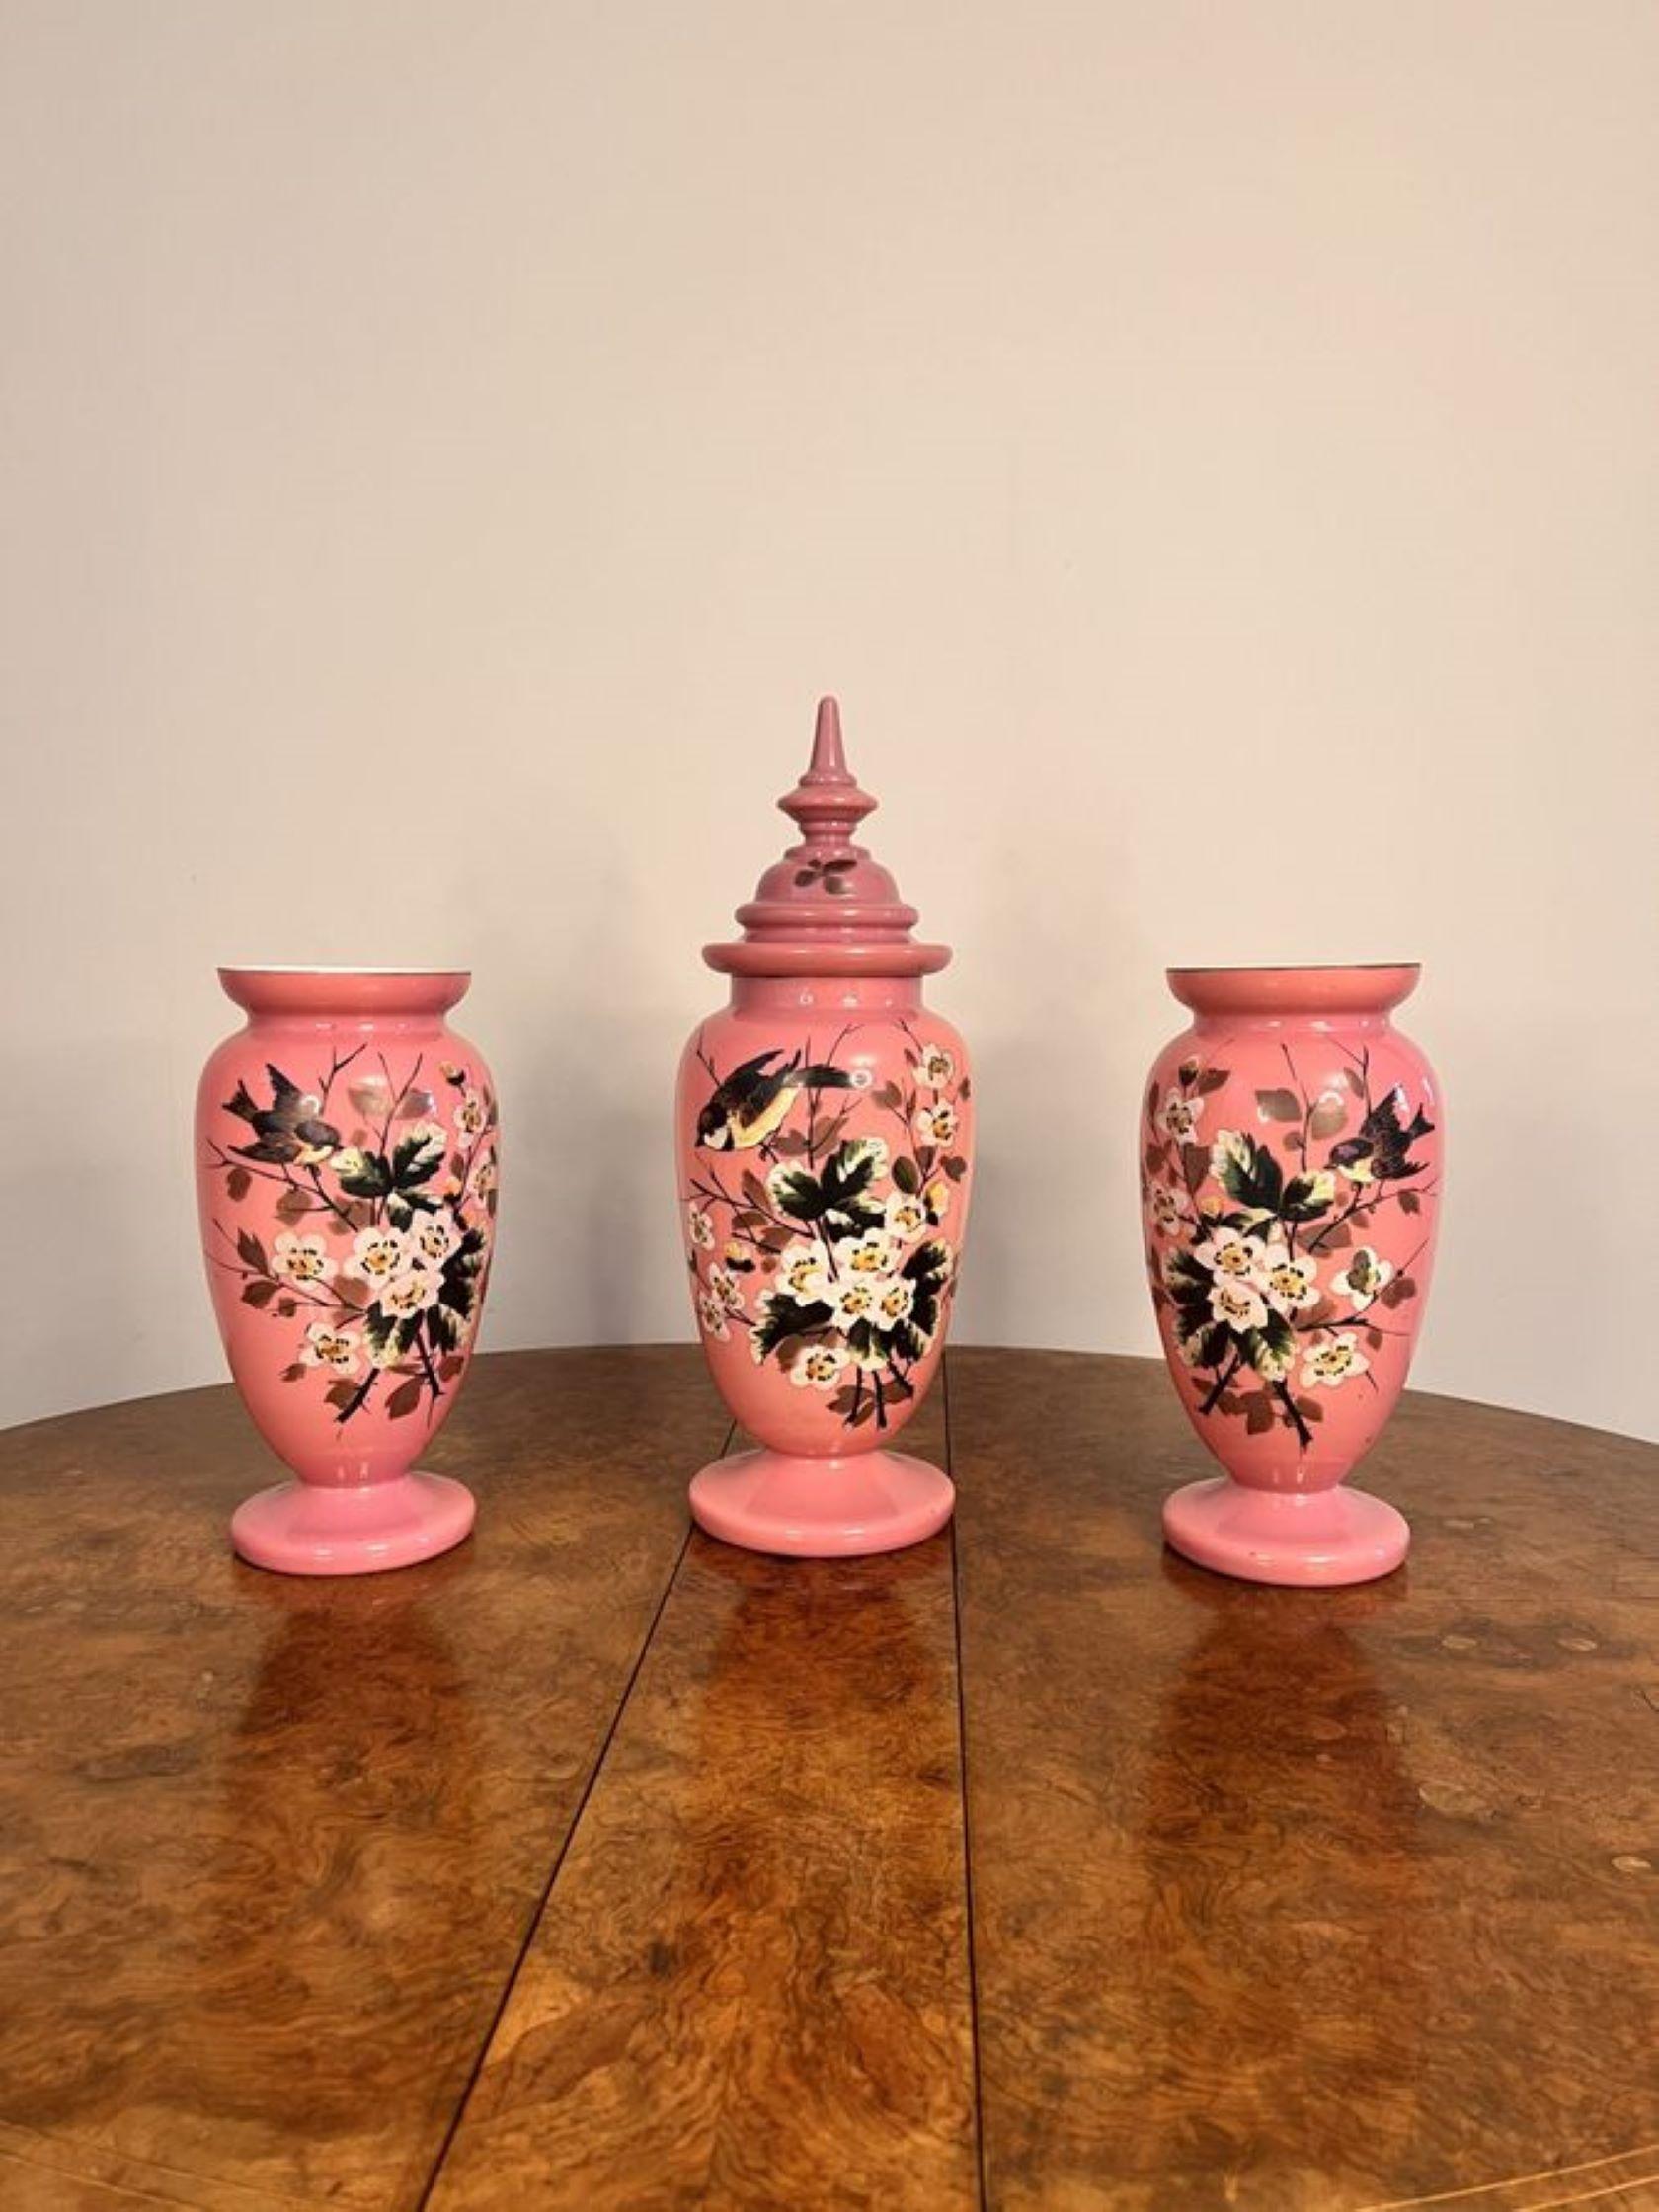 Stunning quality antique Victorian garniture of glass vases, consisting on three quality antique pink glass vases, having a centre lidded vase with two open top vases, fantastic hand painted decorated with birds and flowers in wonderful green,